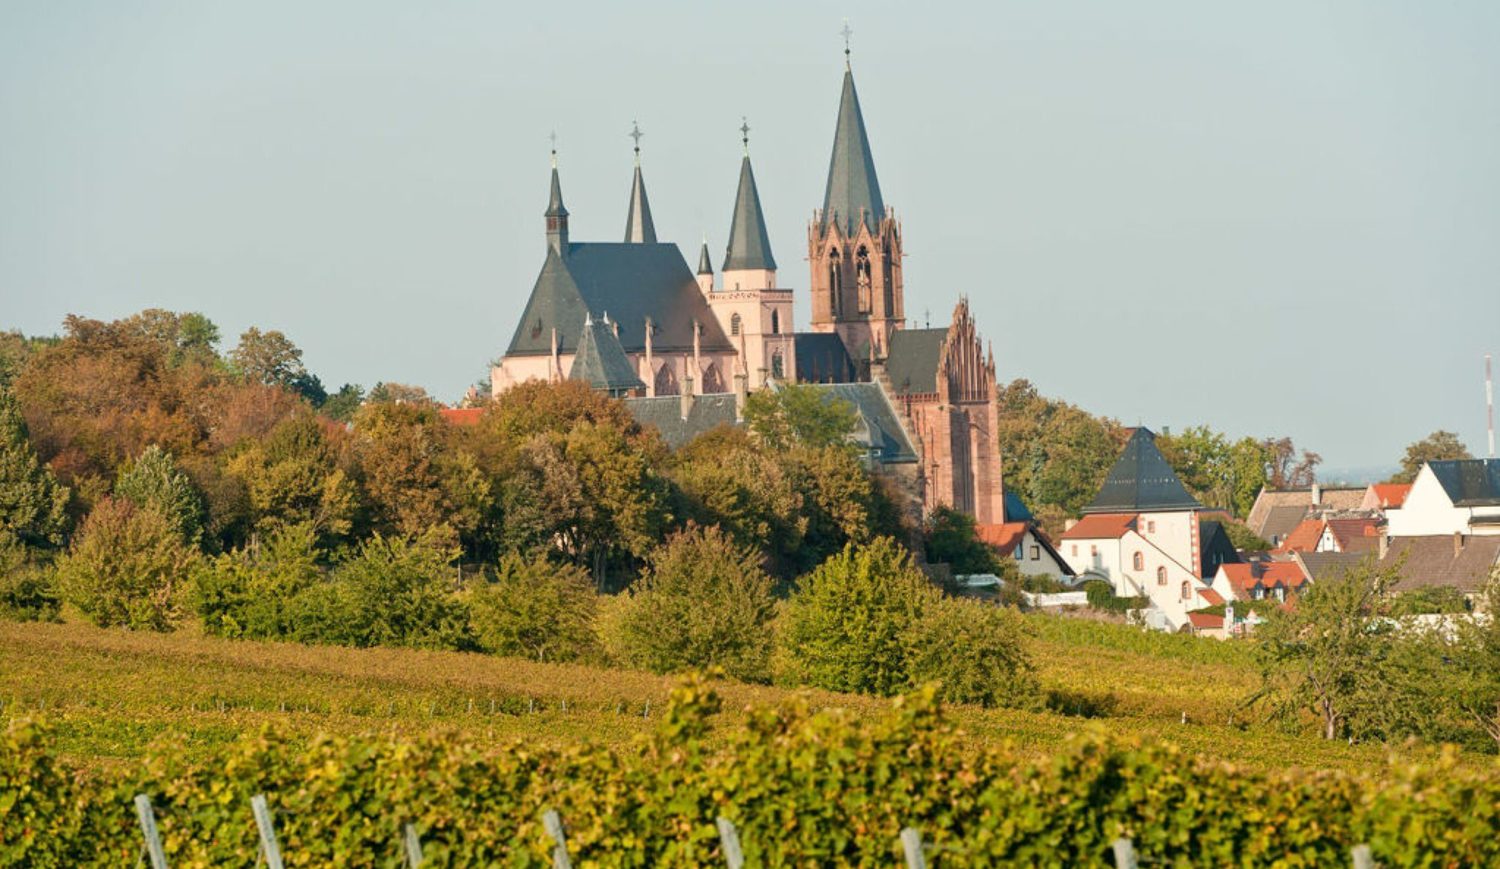 St. Catherine's Church in Oppenheim, one of the most important Gothic churches on the Rhine